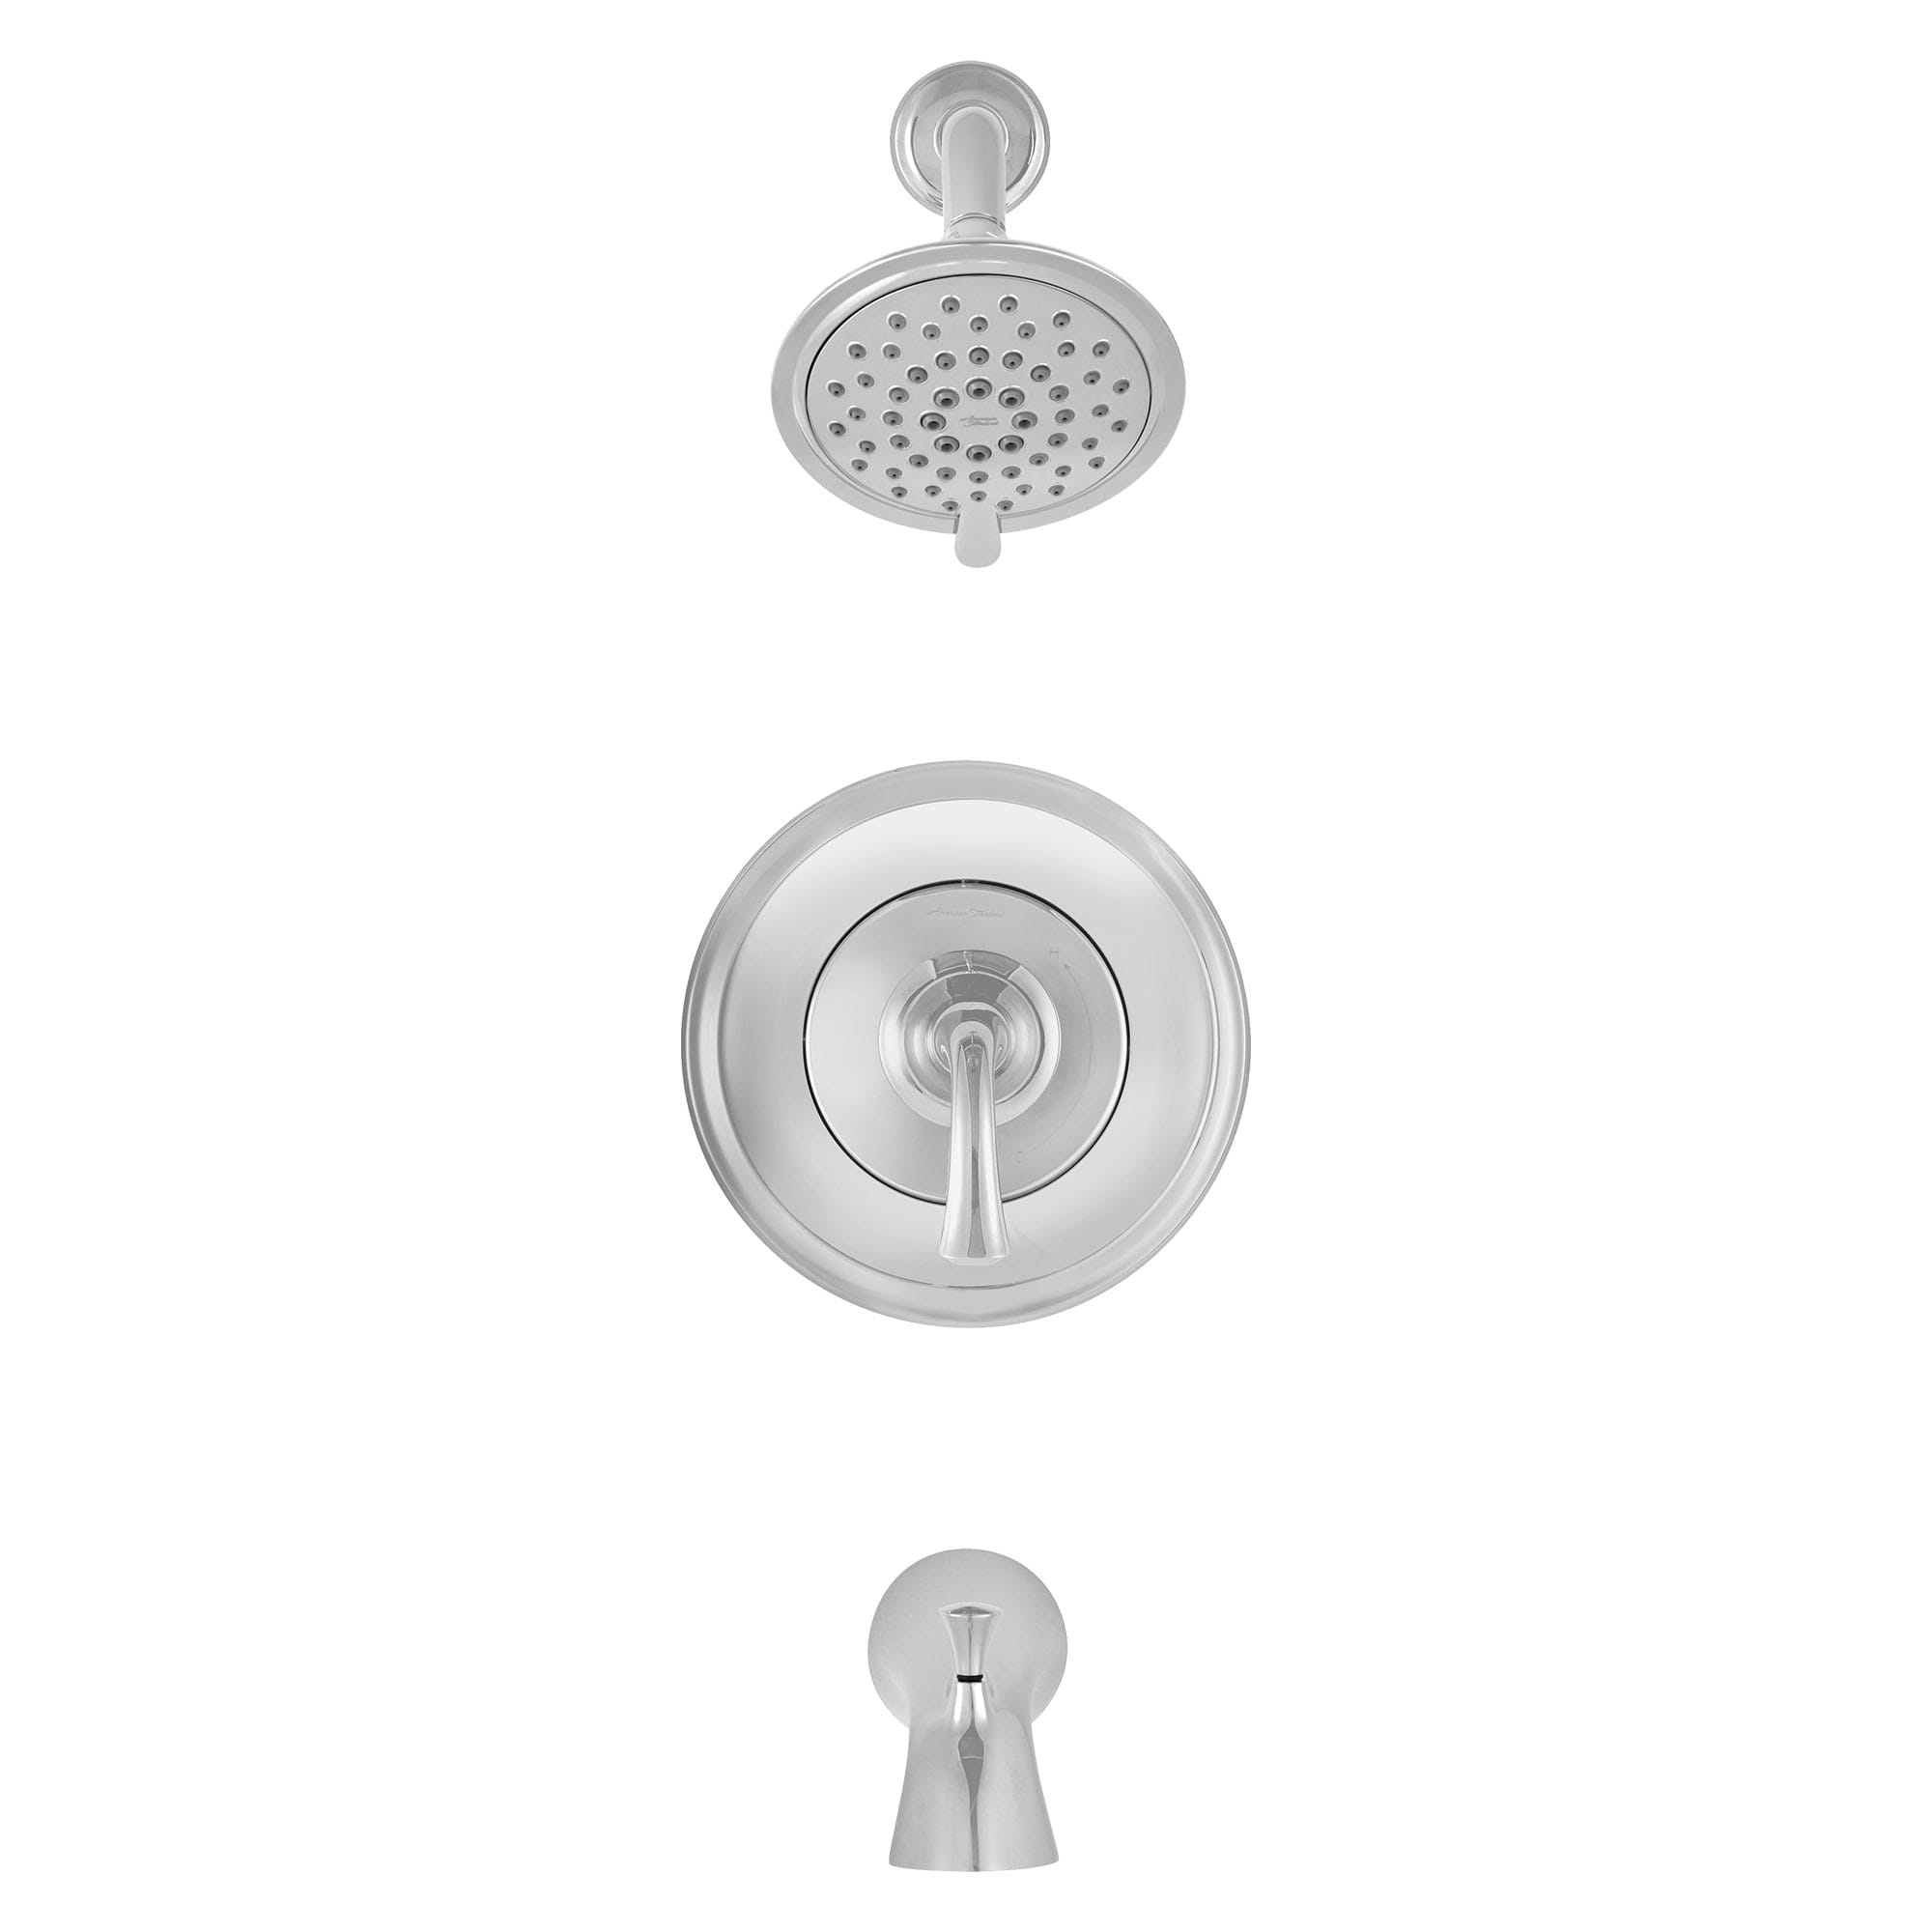 Patience® 2.5 gpm/9.5 L/min Tub and Shower Trim Kit With 3-Function Showerhead, Double Ceramic Pressure Balance Cartridge With Lever Handle